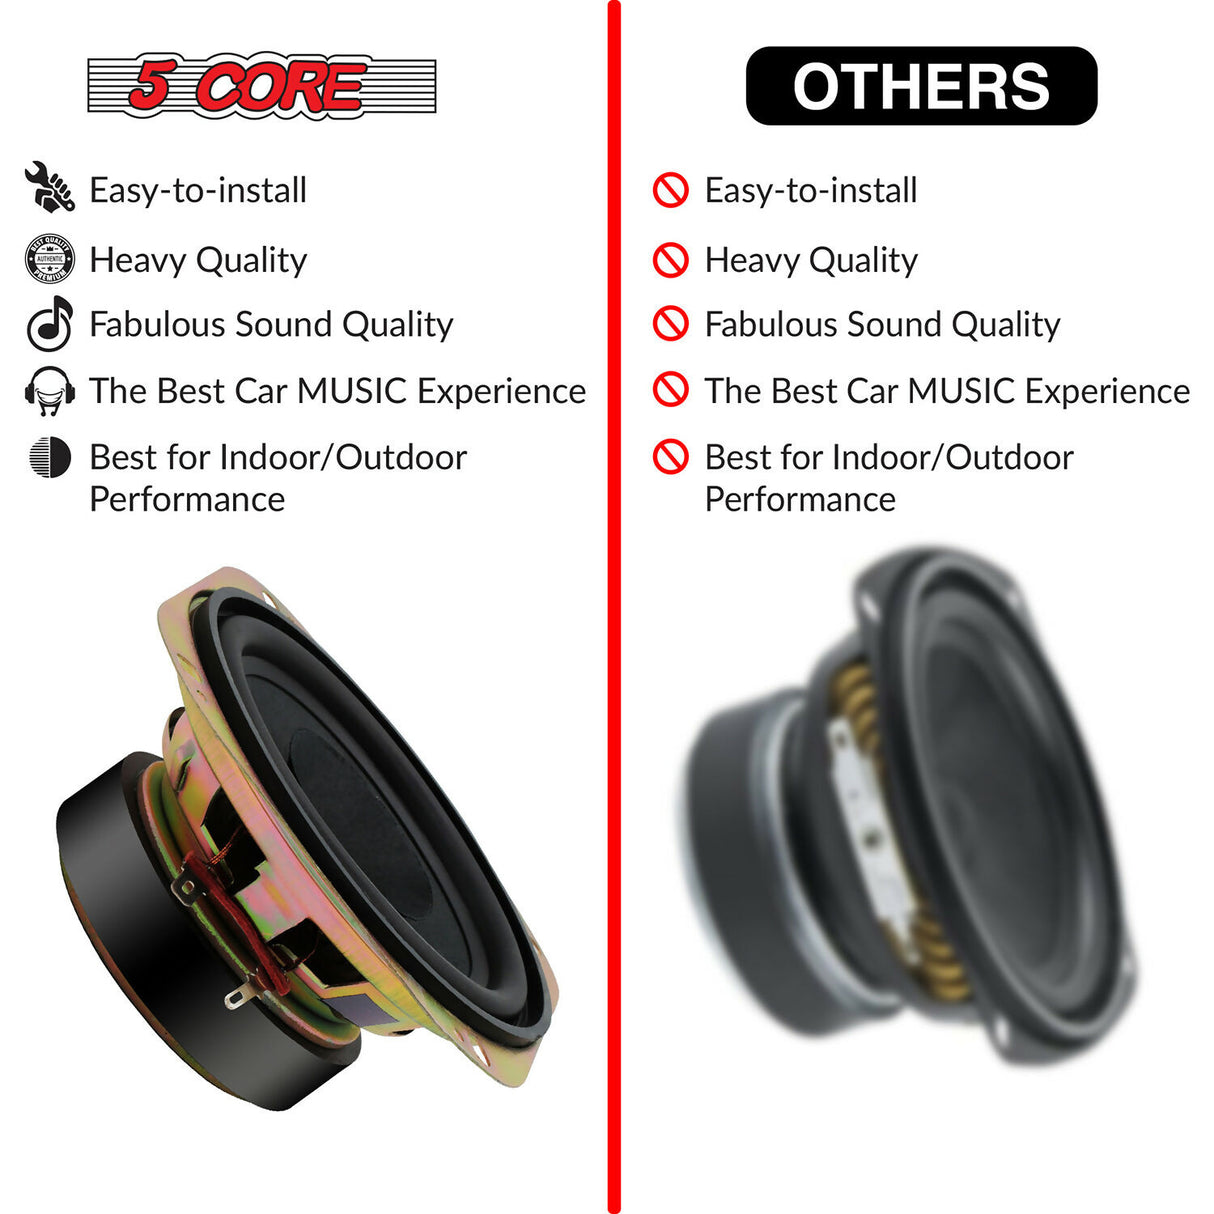 Choose a truck subwoofer and subwoofer 12 inch for your vehicle's audio.